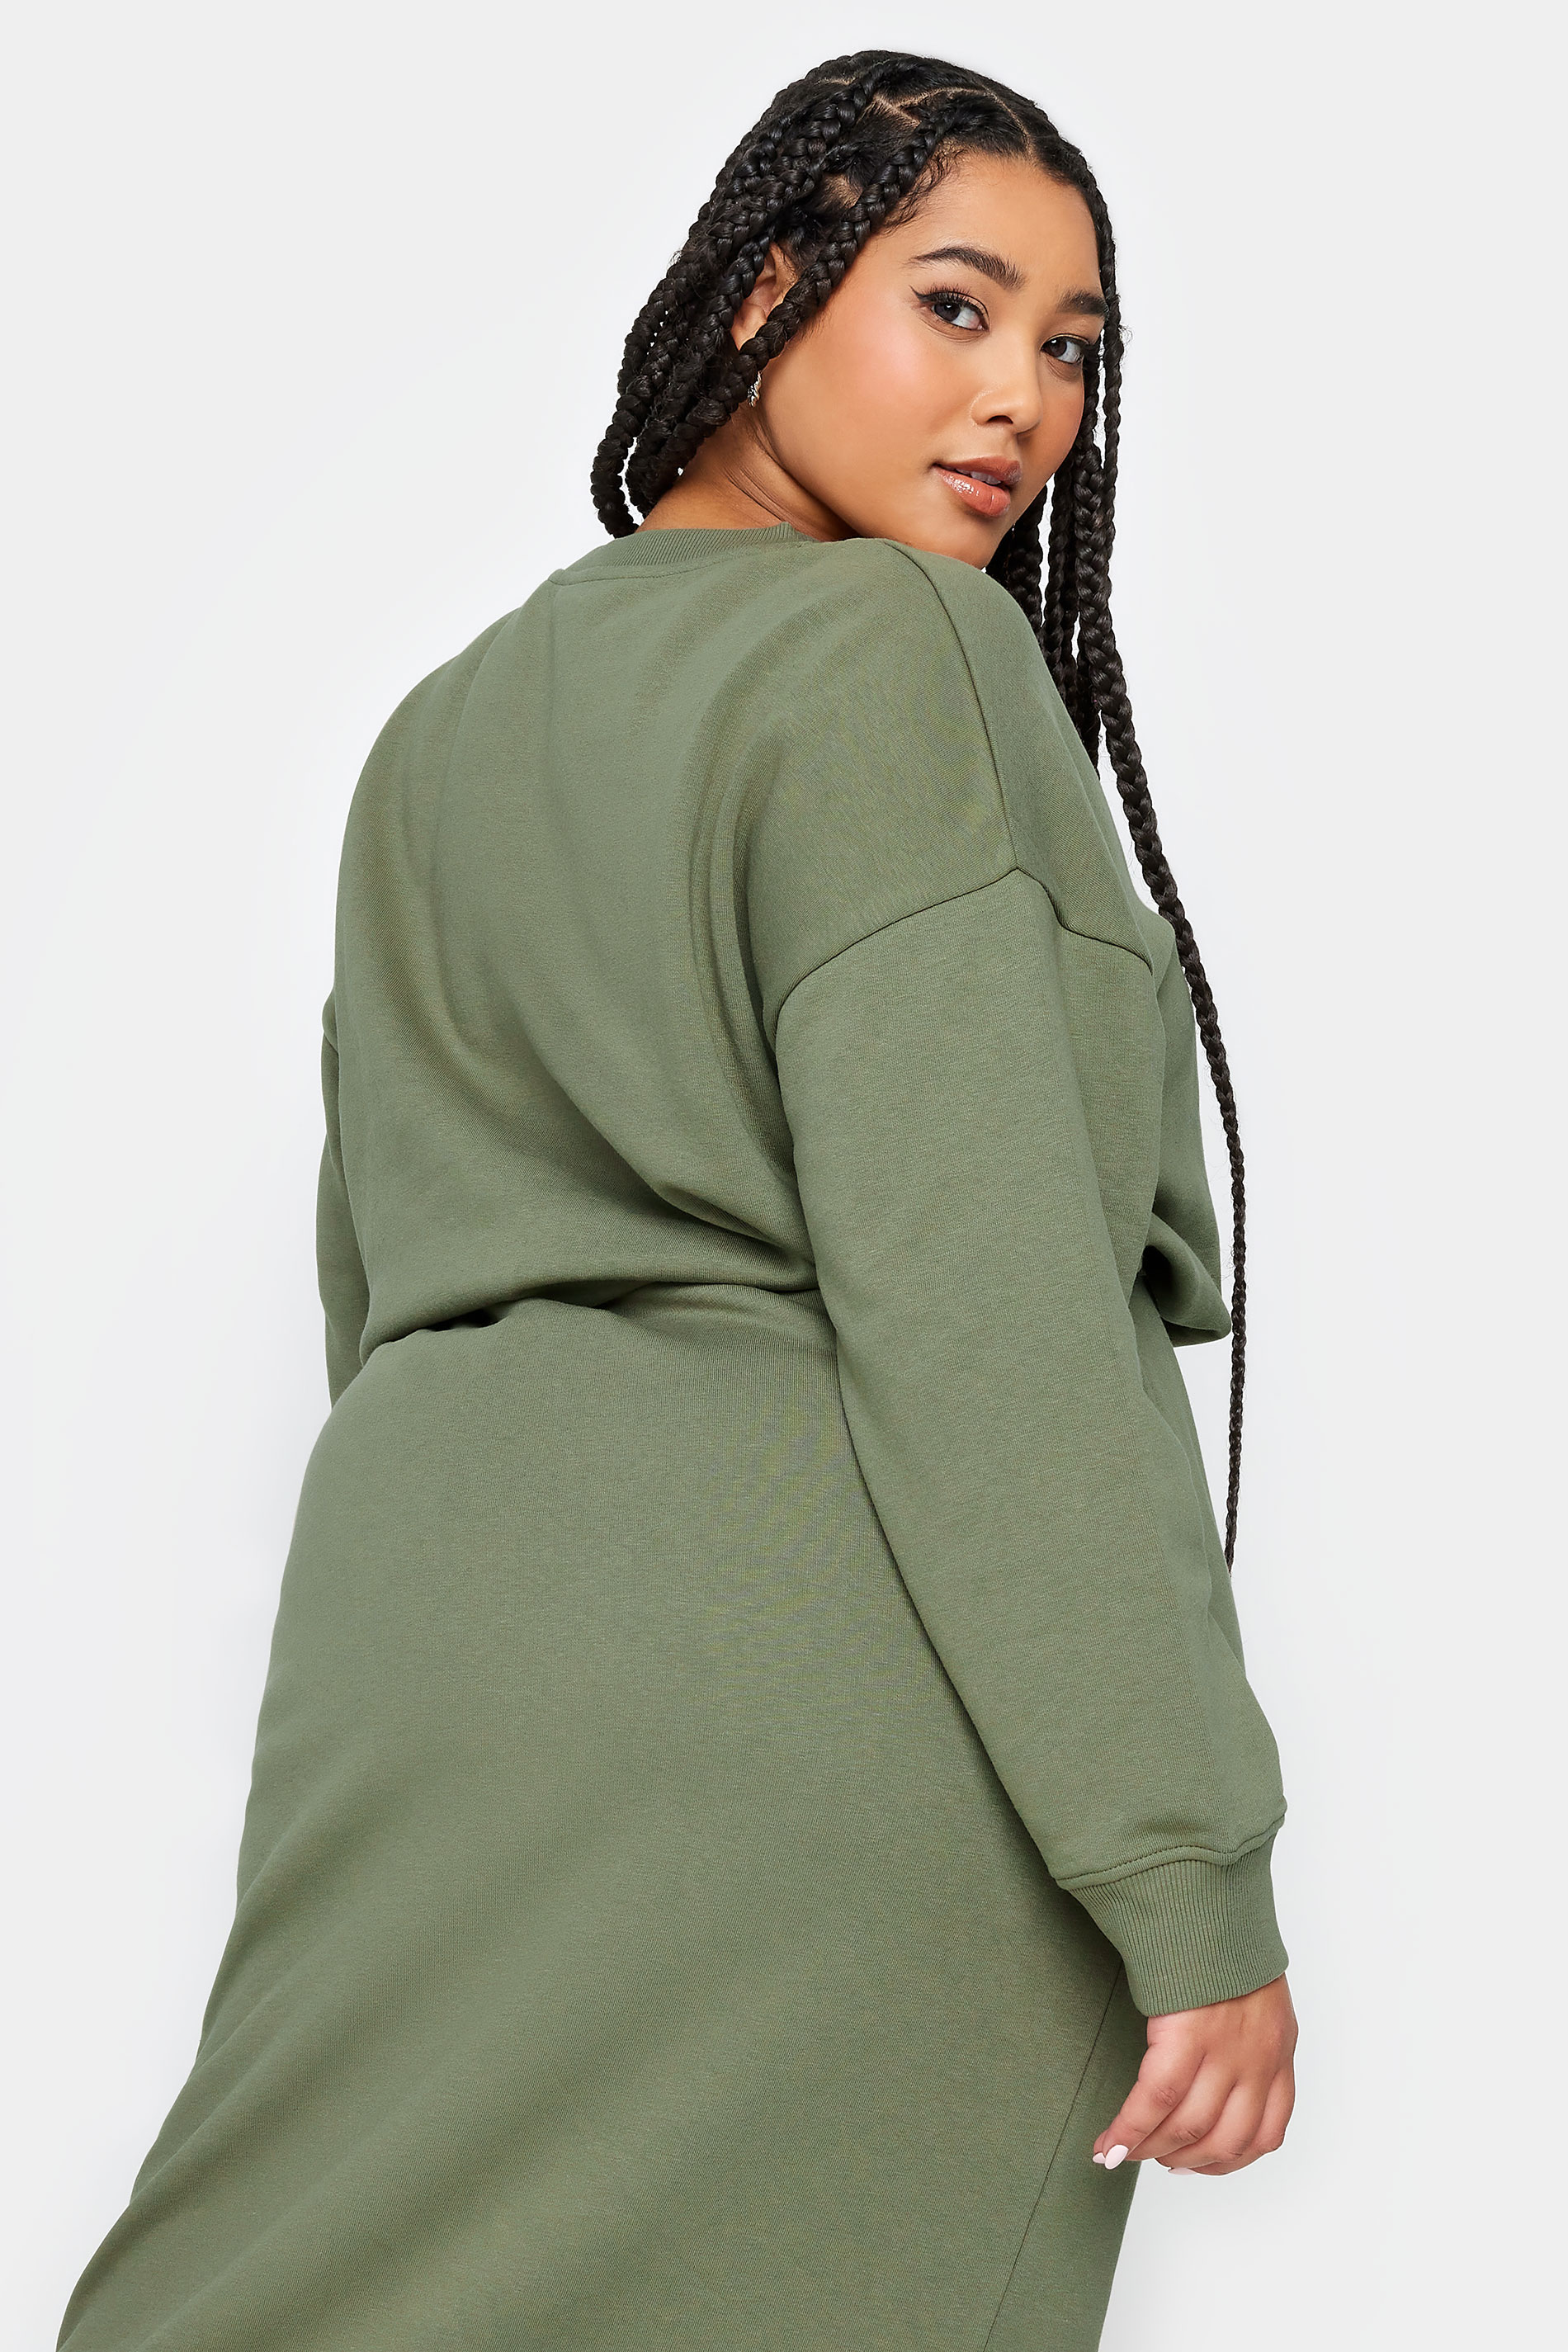 LIMITED COLLECTION Plus Size Khaki Green Cropped Sweatshirt | Yours Clothing 3